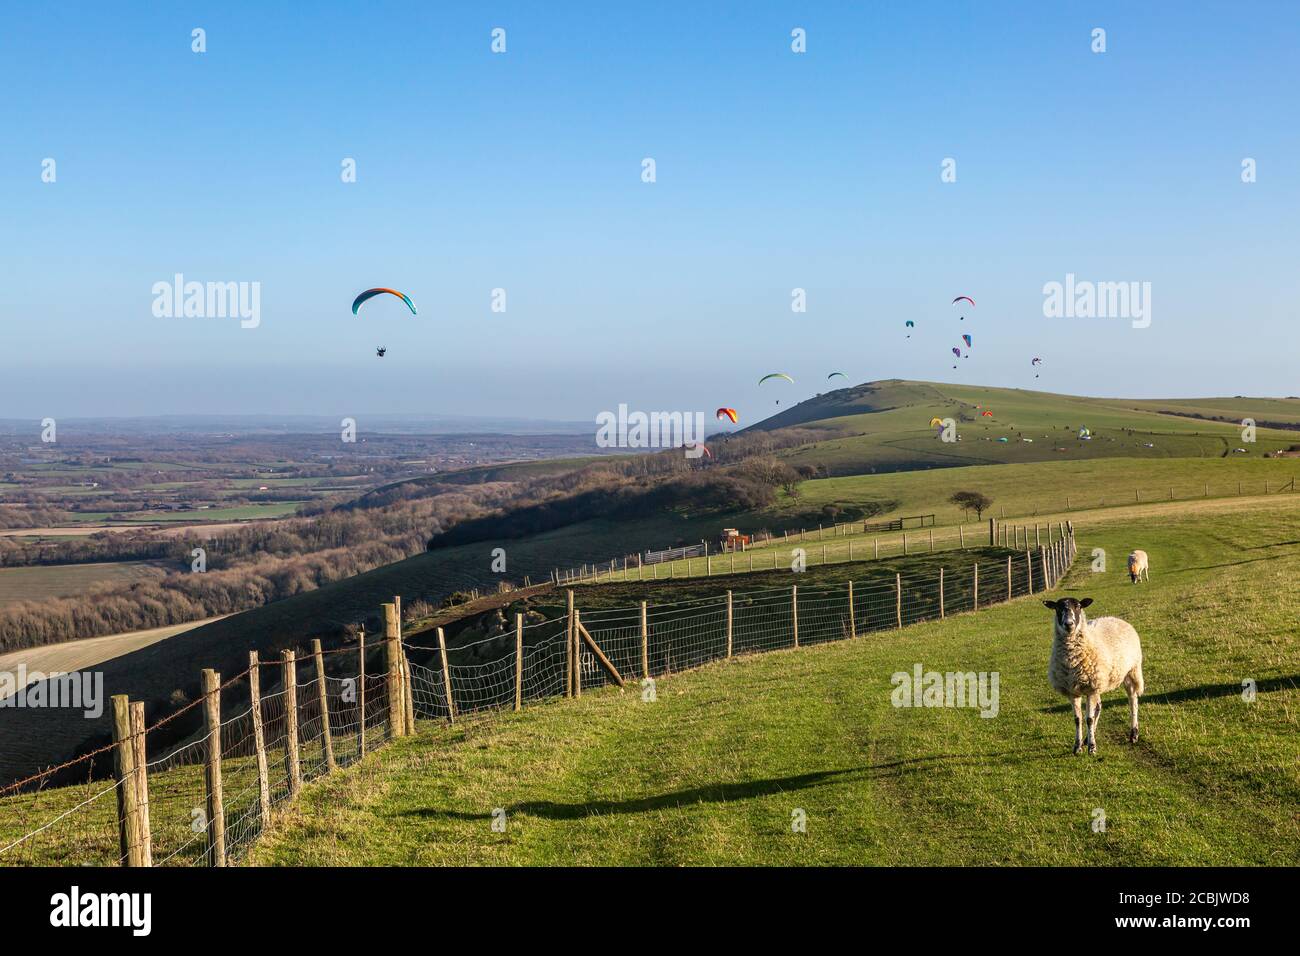 A sheep in the Sussex countryside with paragliders in the sky behind Stock Photo